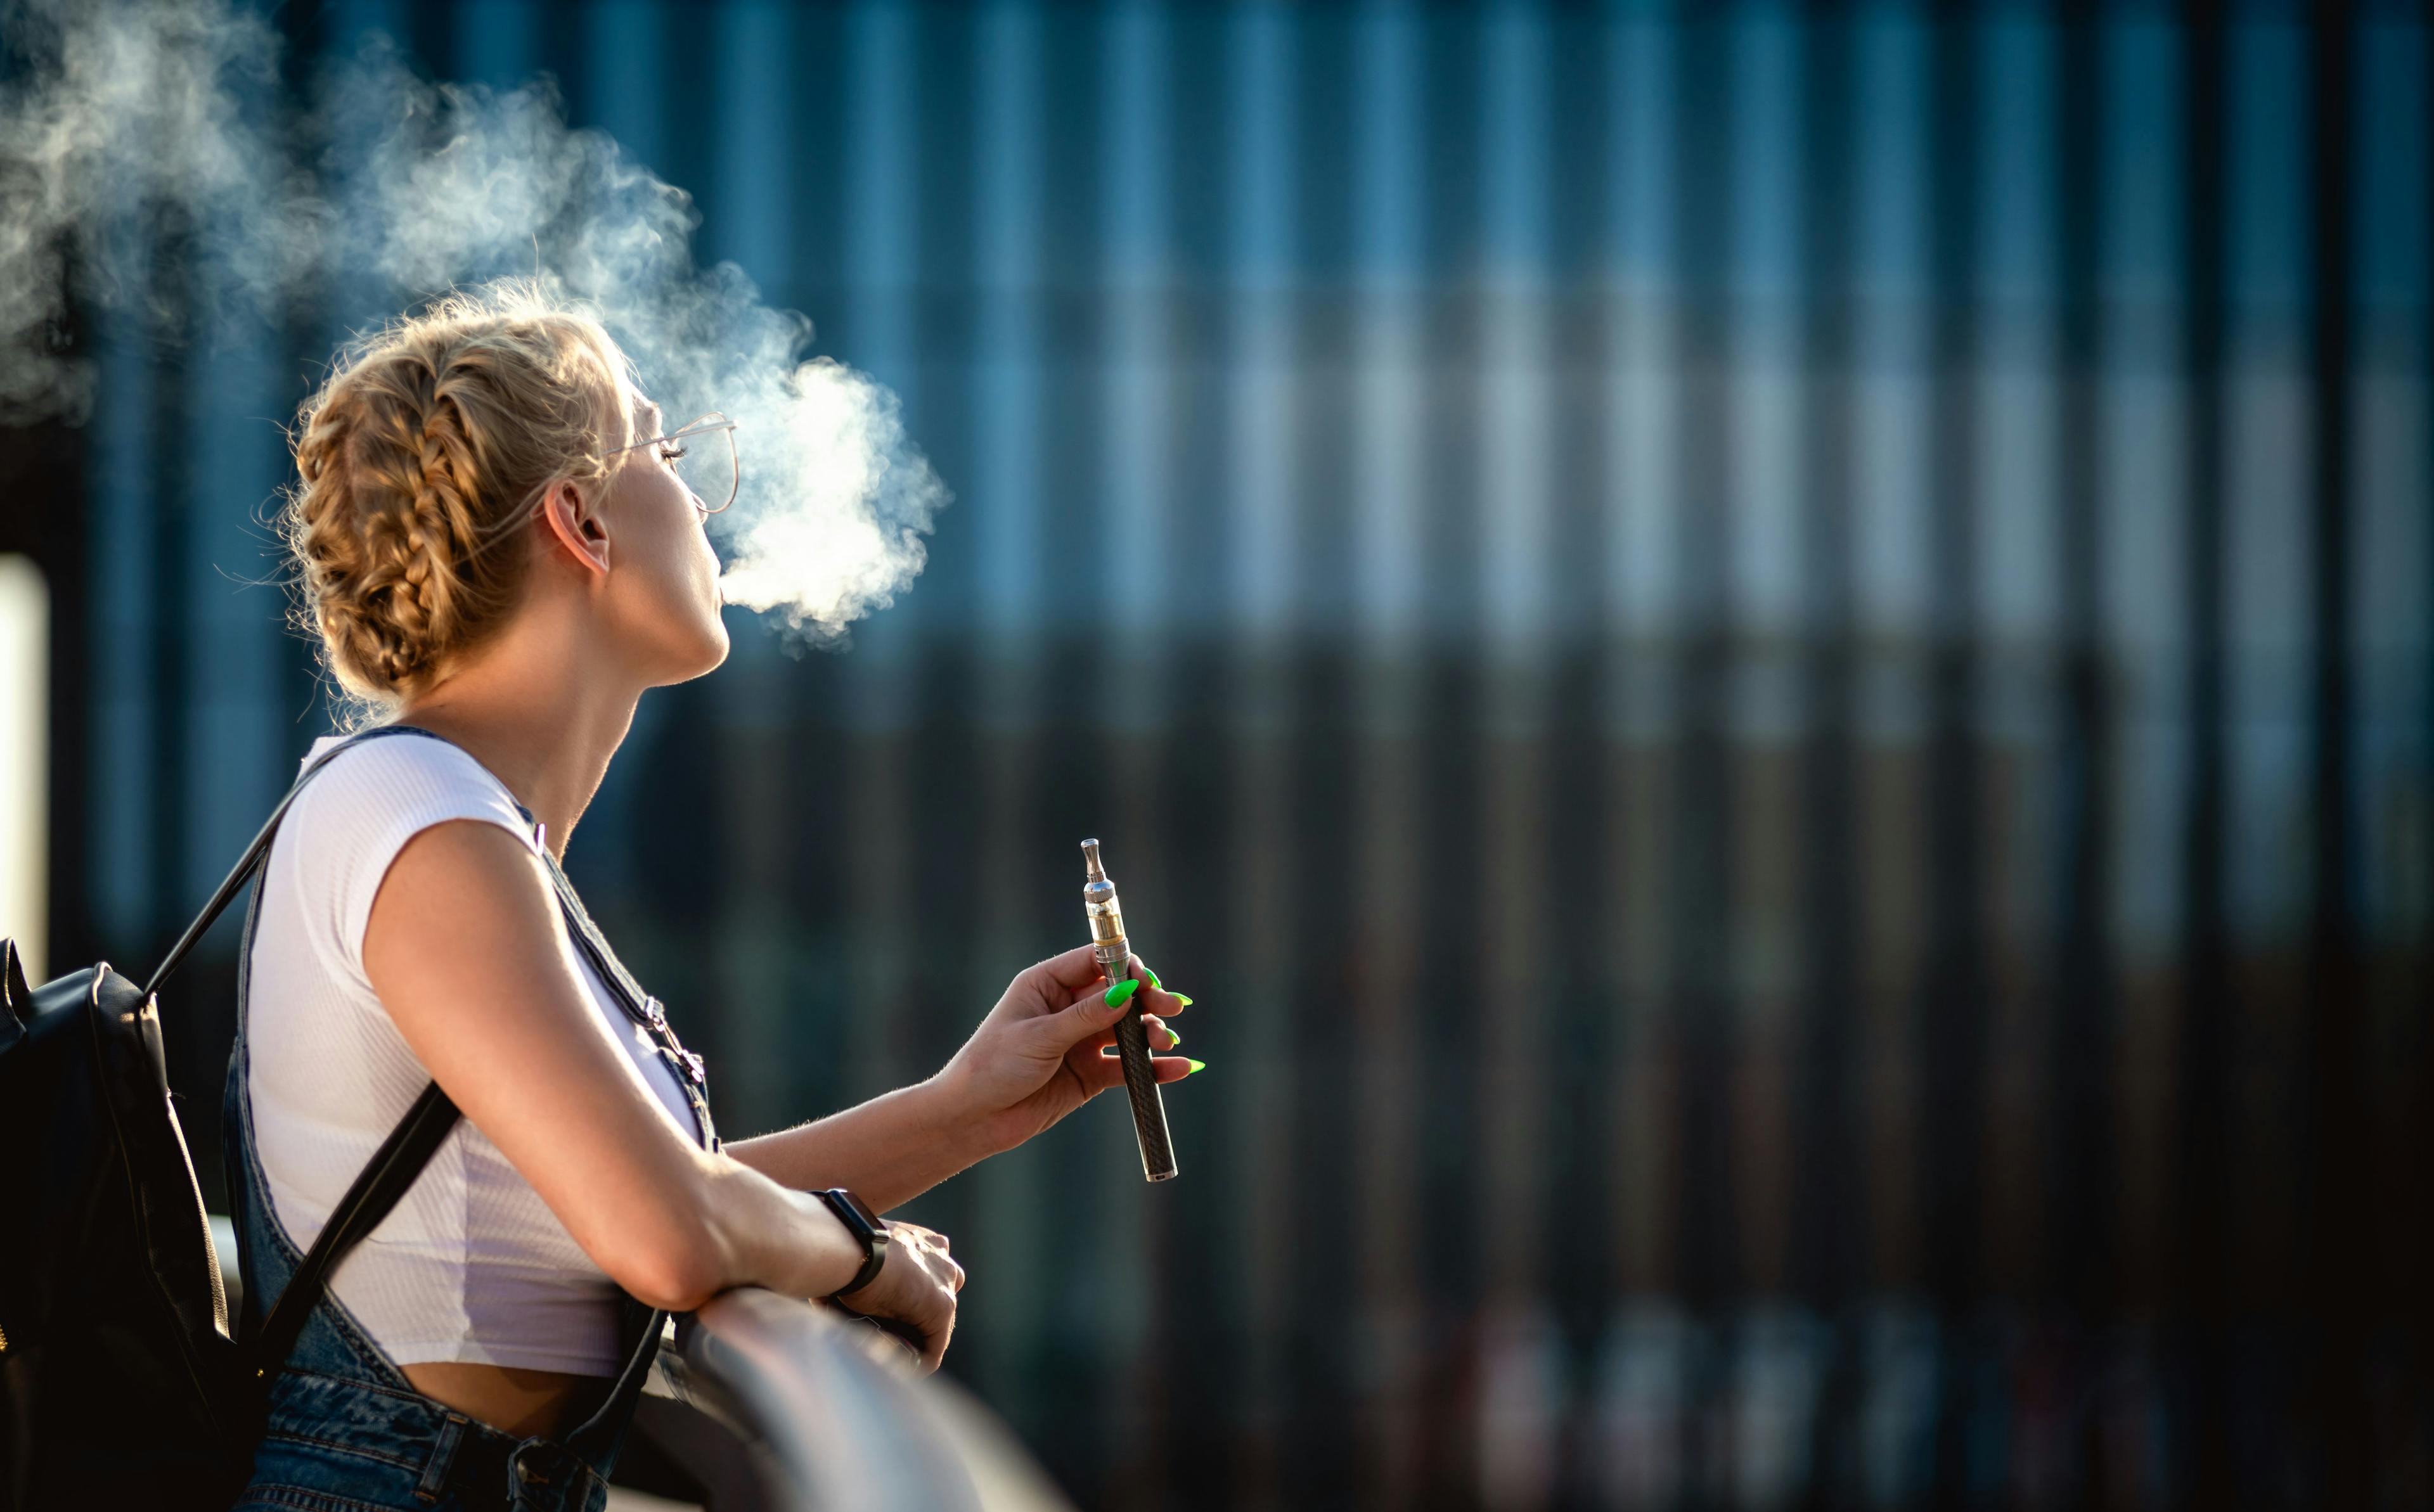 Young woman outdoor vaping e-cigarette on modern city buildings background | Image Credit: leszekglasner - stock.adobe.com